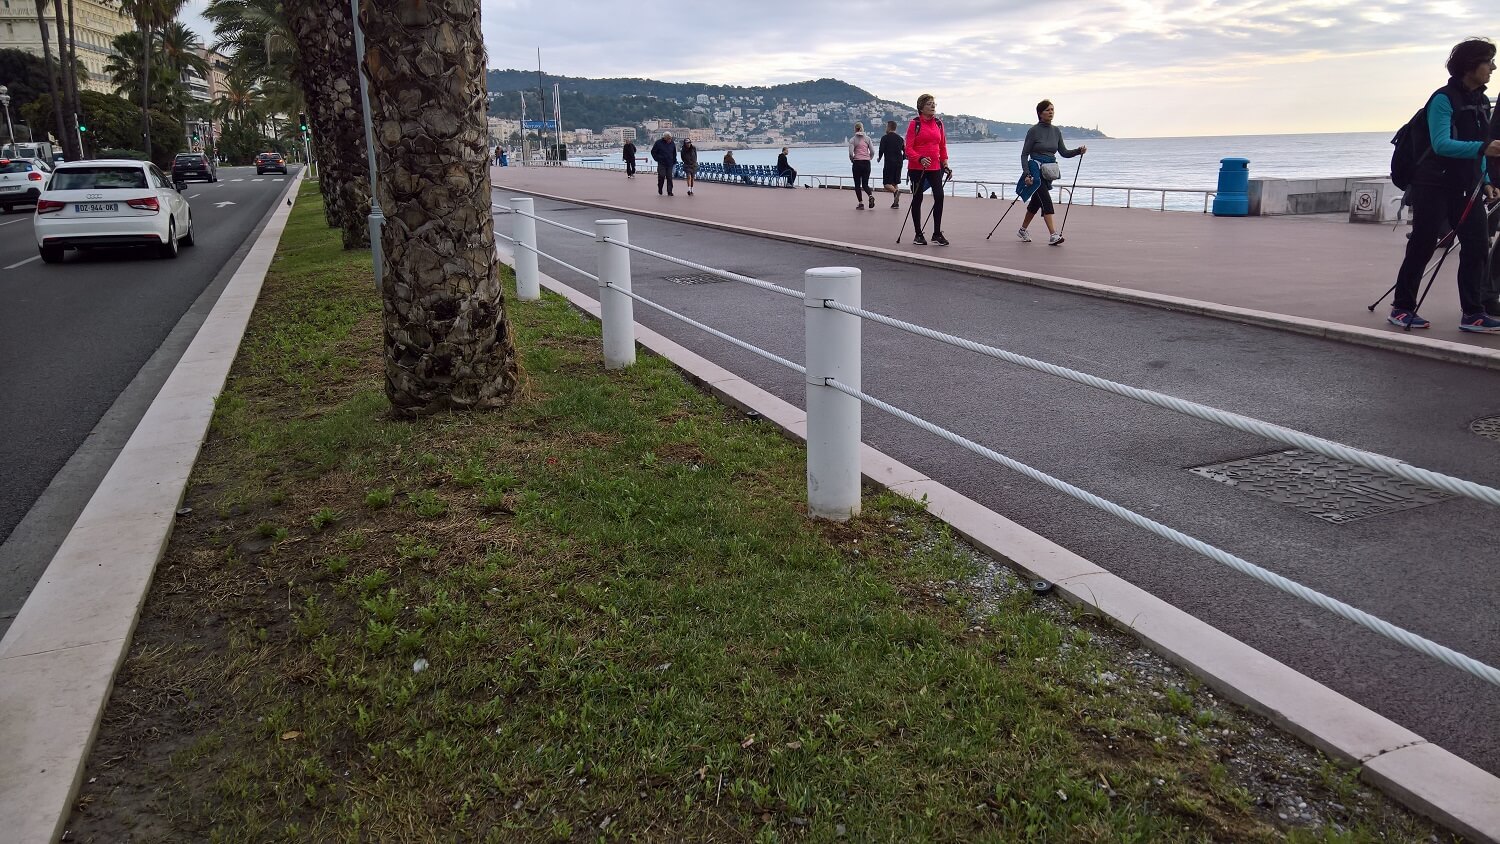 PROTECTION OF PROMENADE DES ANGLAIS IN NICE